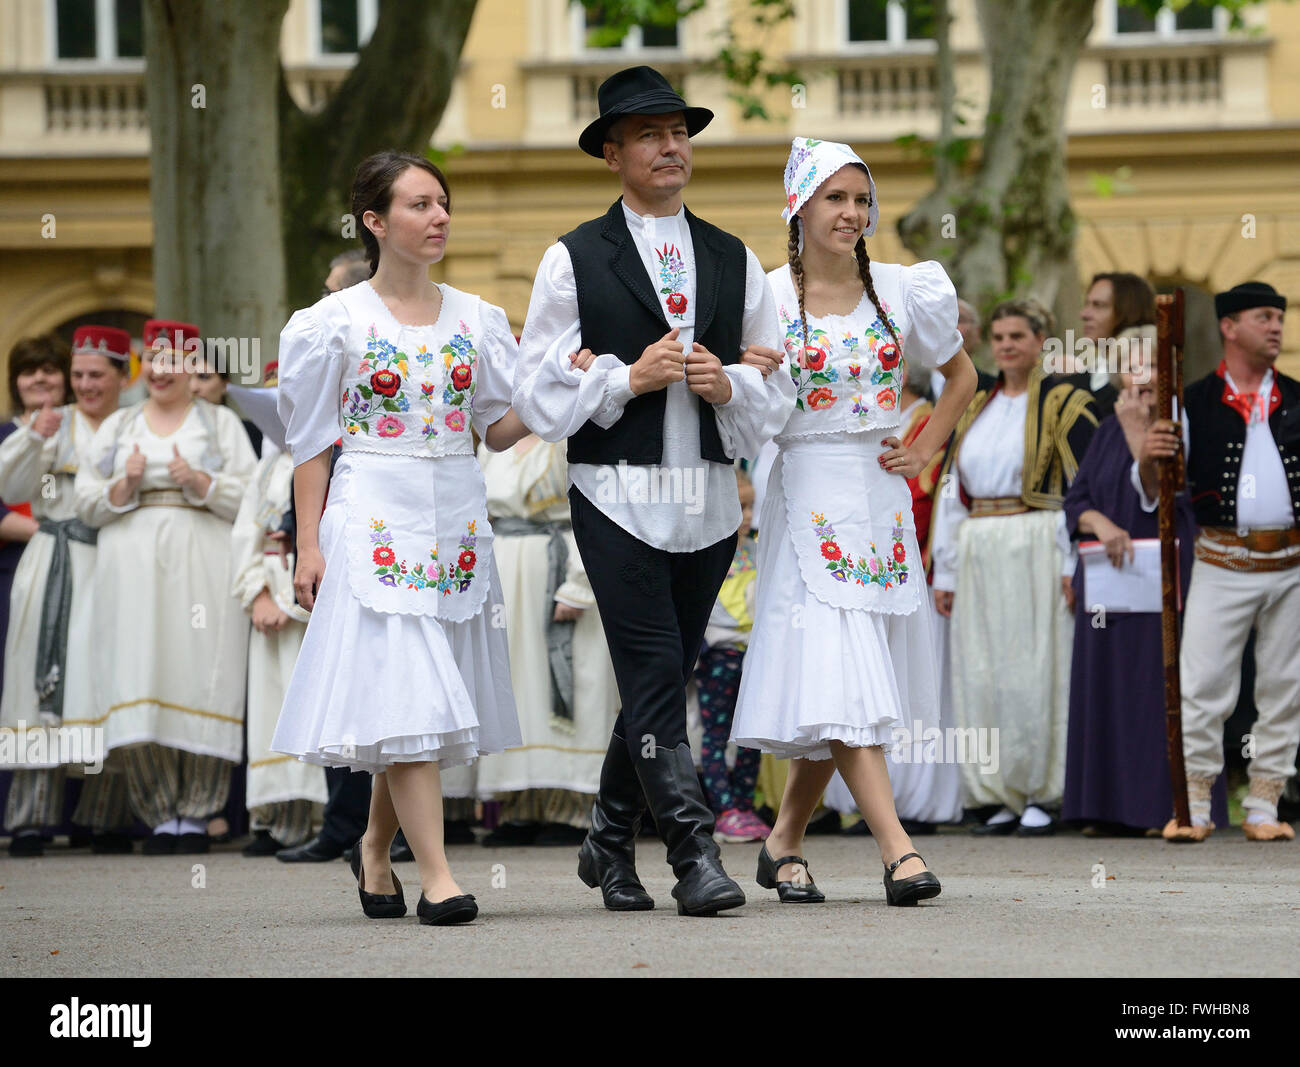 Zagreb, Croatia. 12th June, 2016. Participants dressed in Hungarian folk costumes perform during the annual Day of National Minorities at Zrinjevac Park in Zagreb, Croatia, June 12, 2016. Members of 18 national minorities settled in Croatia presented their traditional customs, food and folklore to tourists and locals on Sunday. Credit:  Miso Lisanin/Xinhua/Alamy Live News Stock Photo